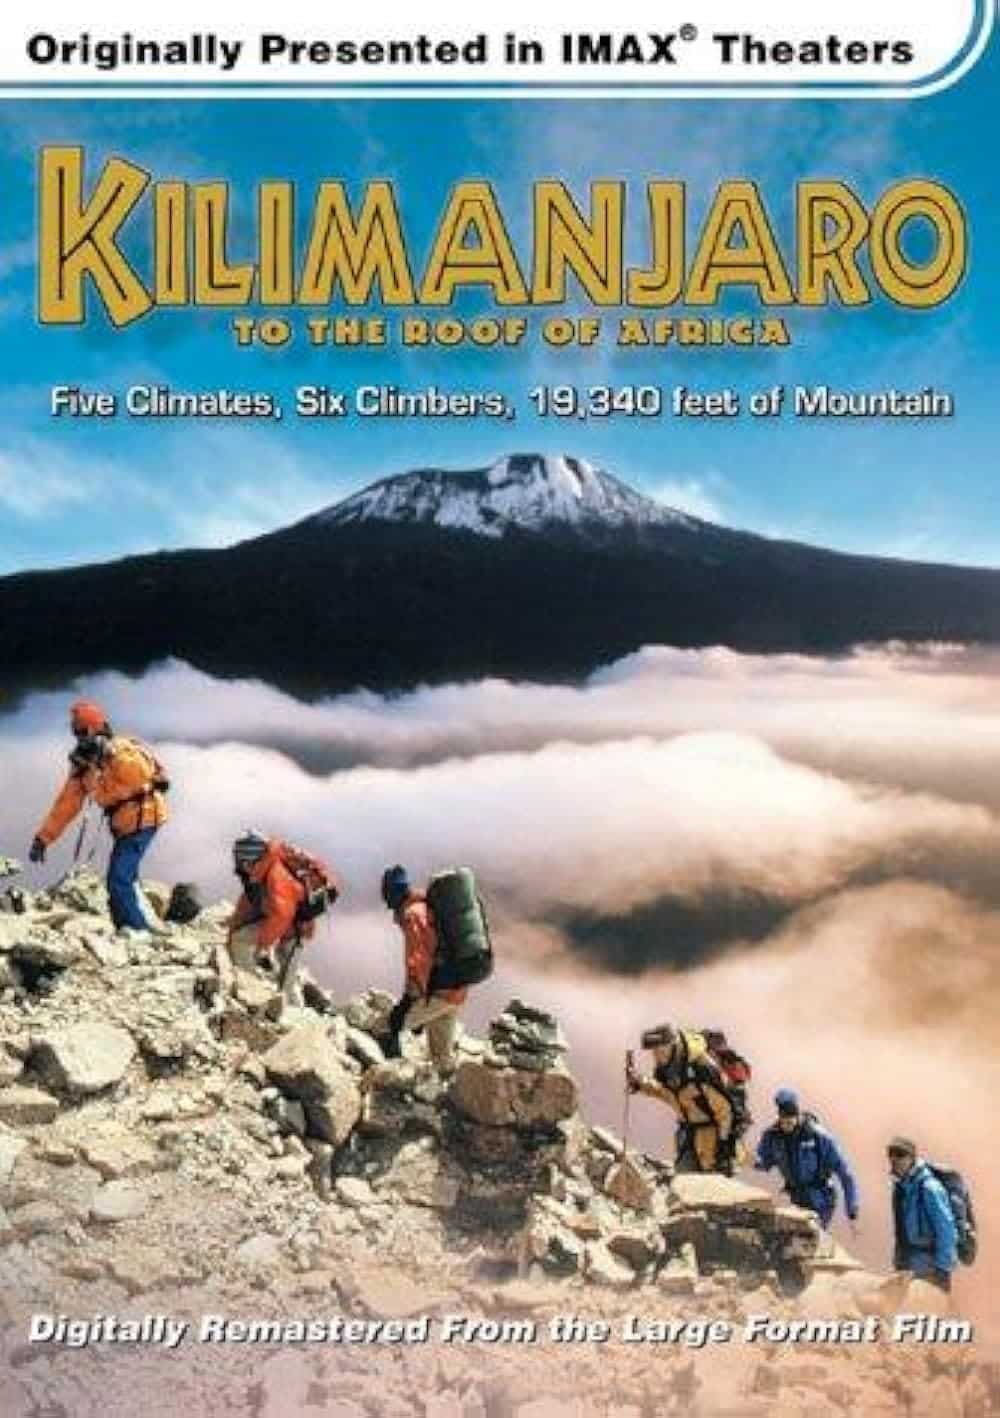 Kilimanjaro to the roof of Africa film